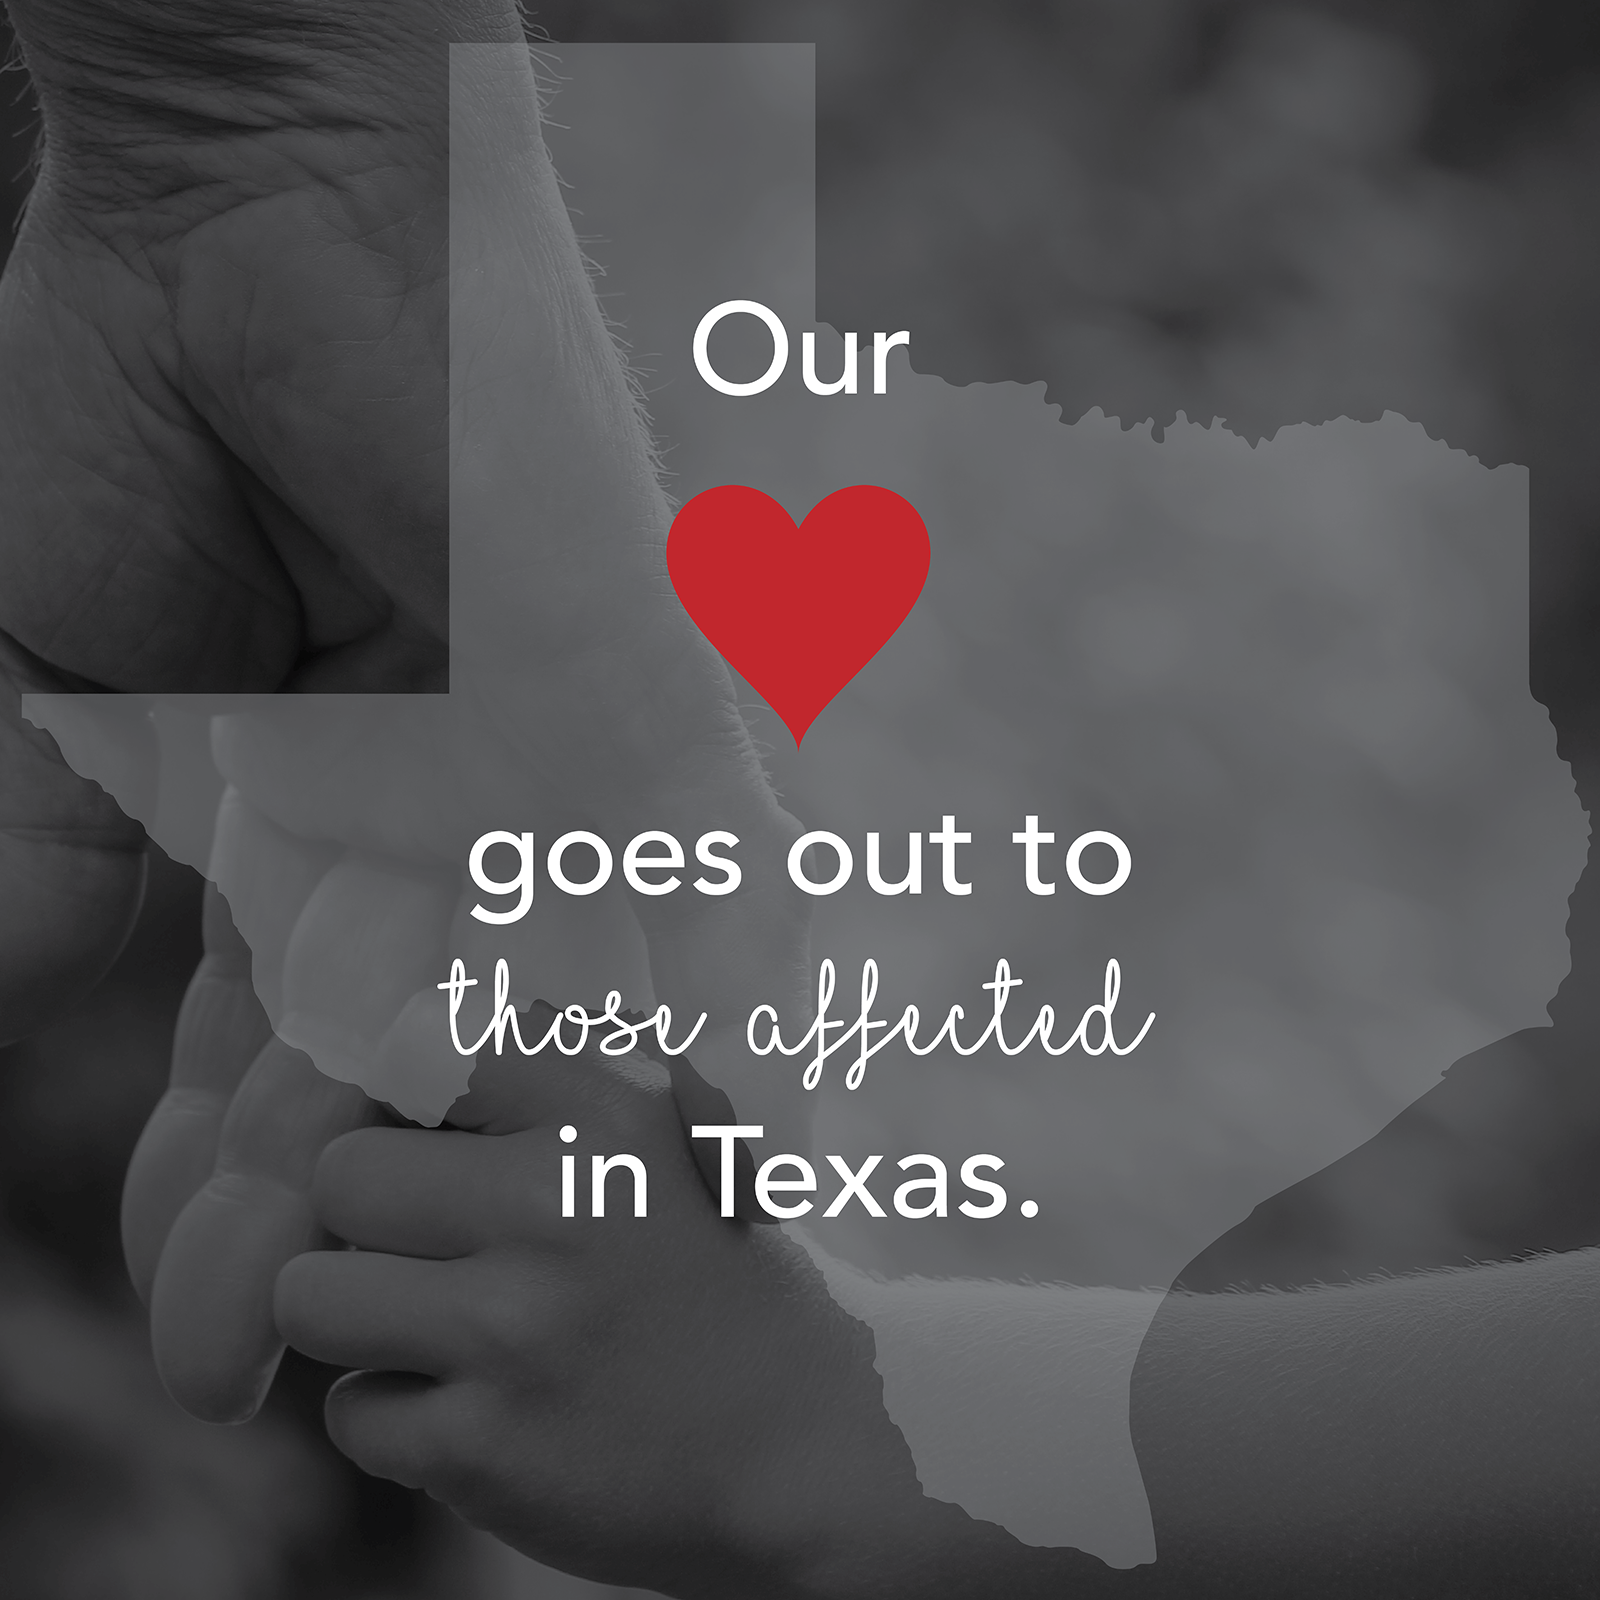 Our Heart Goes Out to Texas